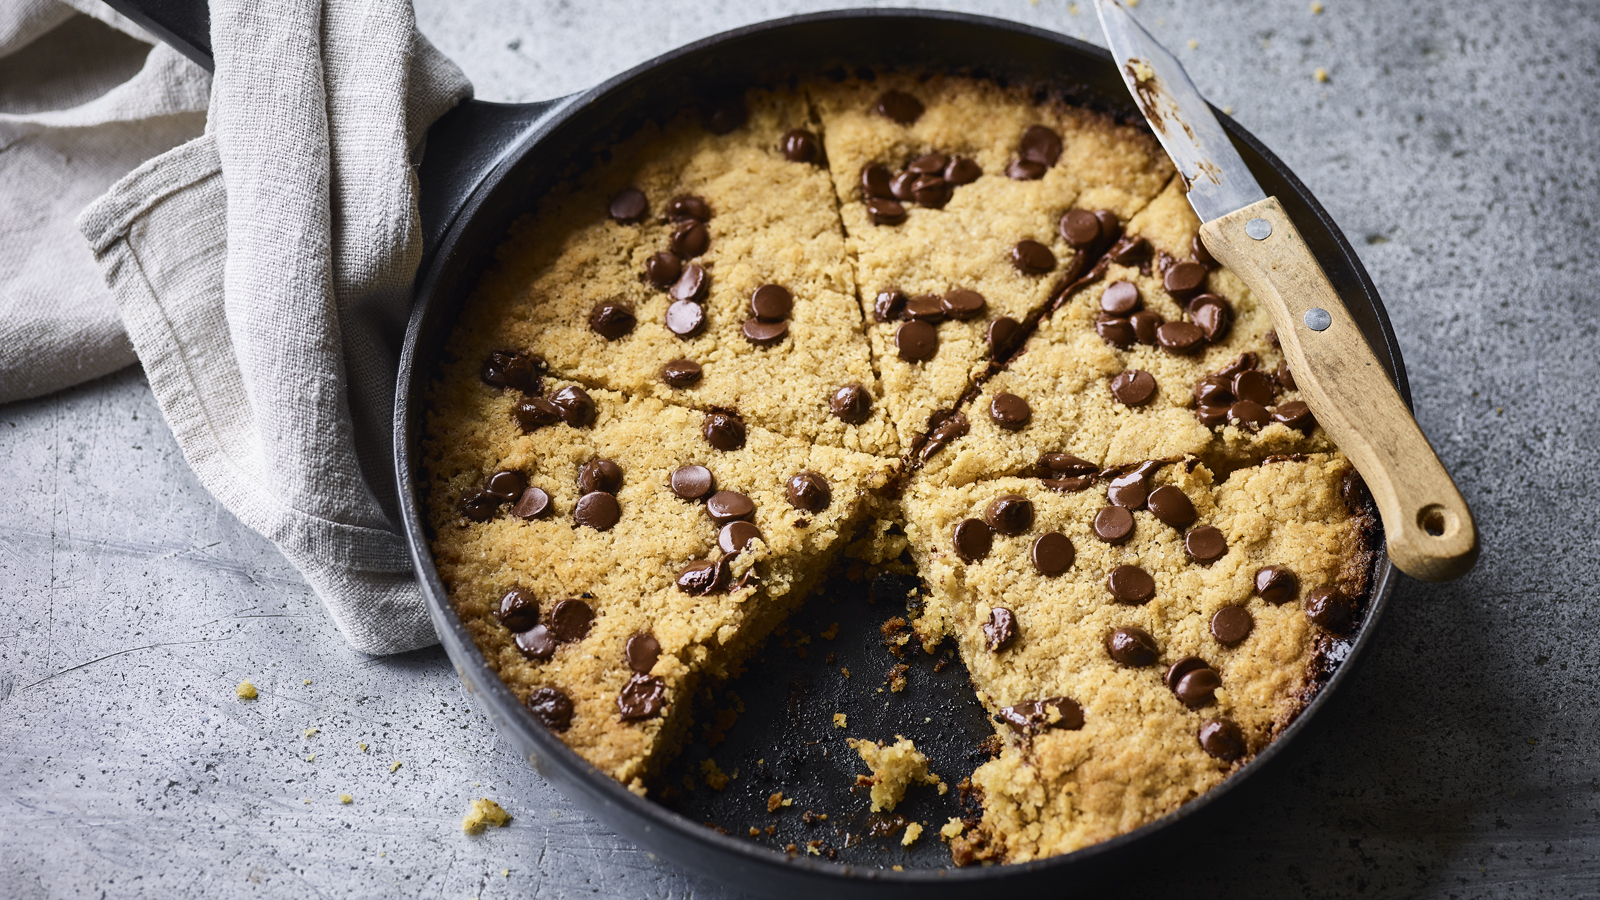 https://food-images.files.bbci.co.uk/food/recipes/choc_chip_pan_cookie_45509_16x9.jpg